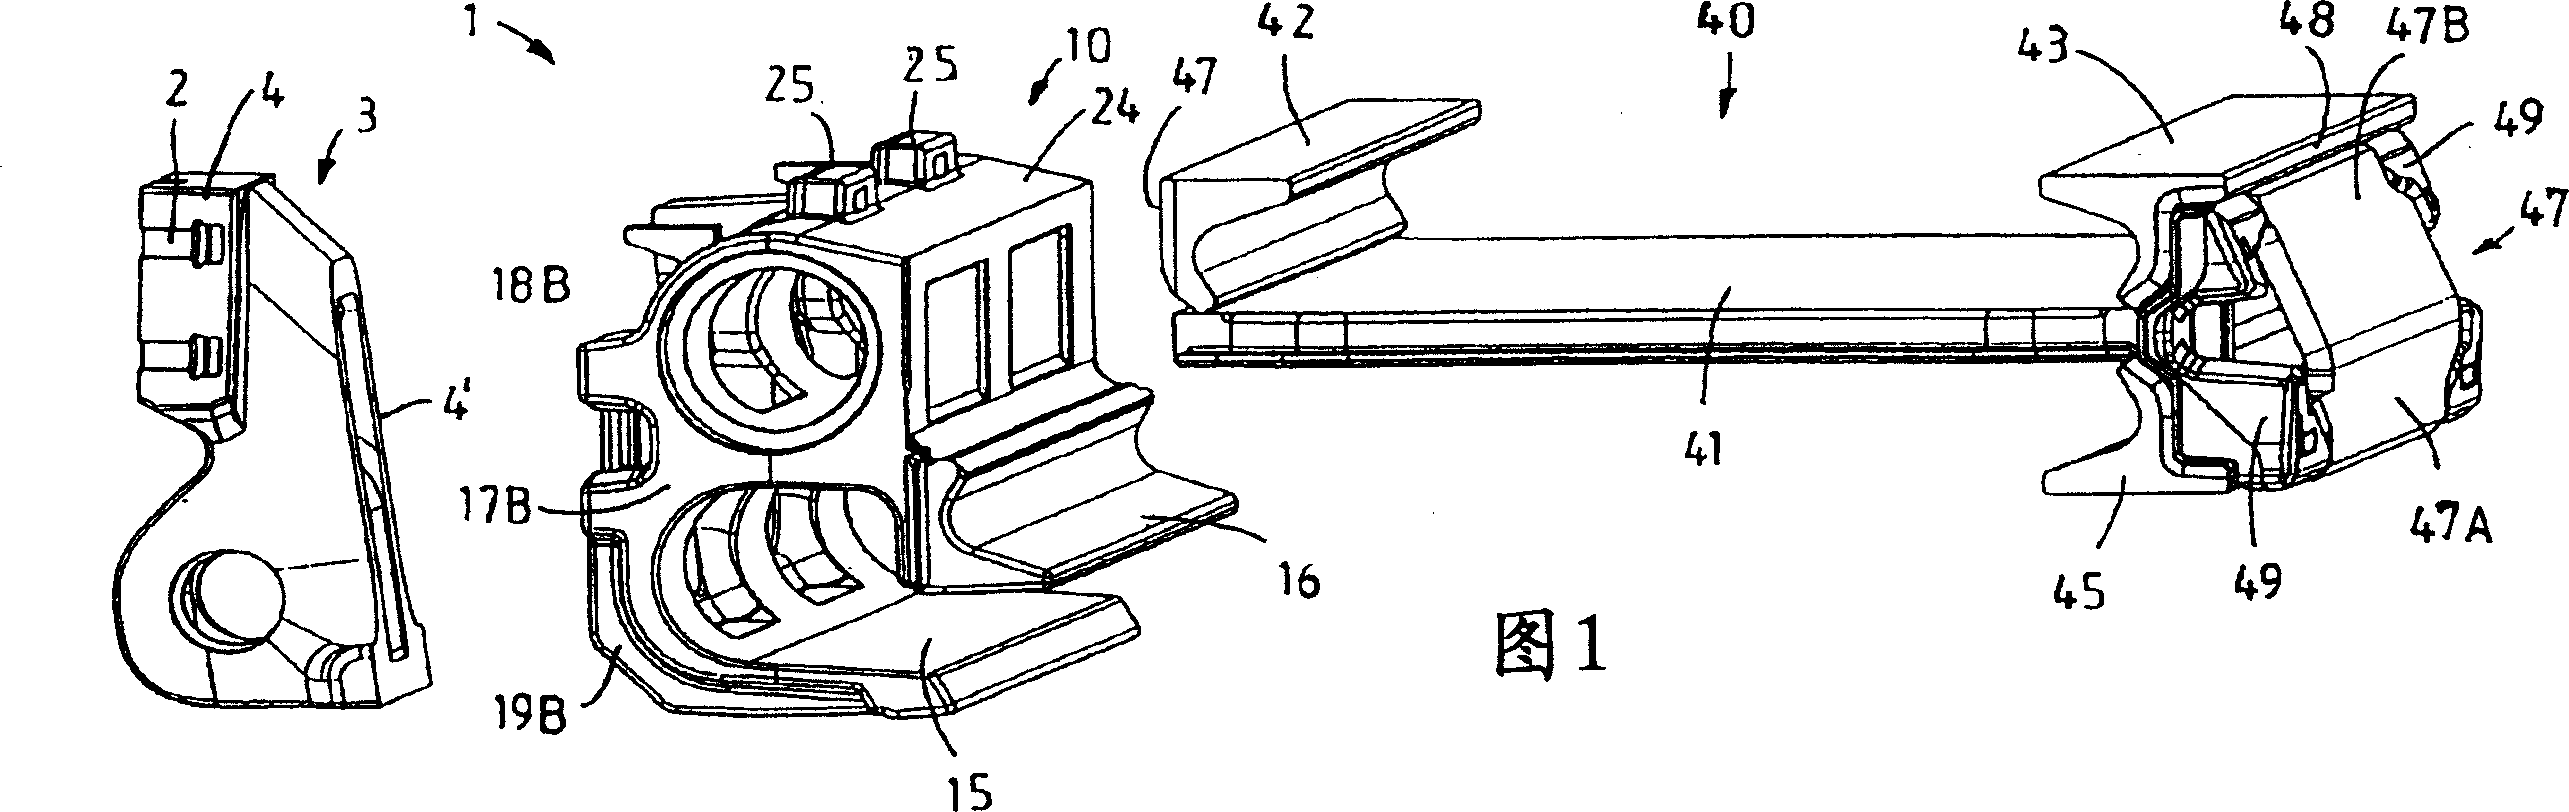 Guiding device for guiding a chain-drawn sword plane